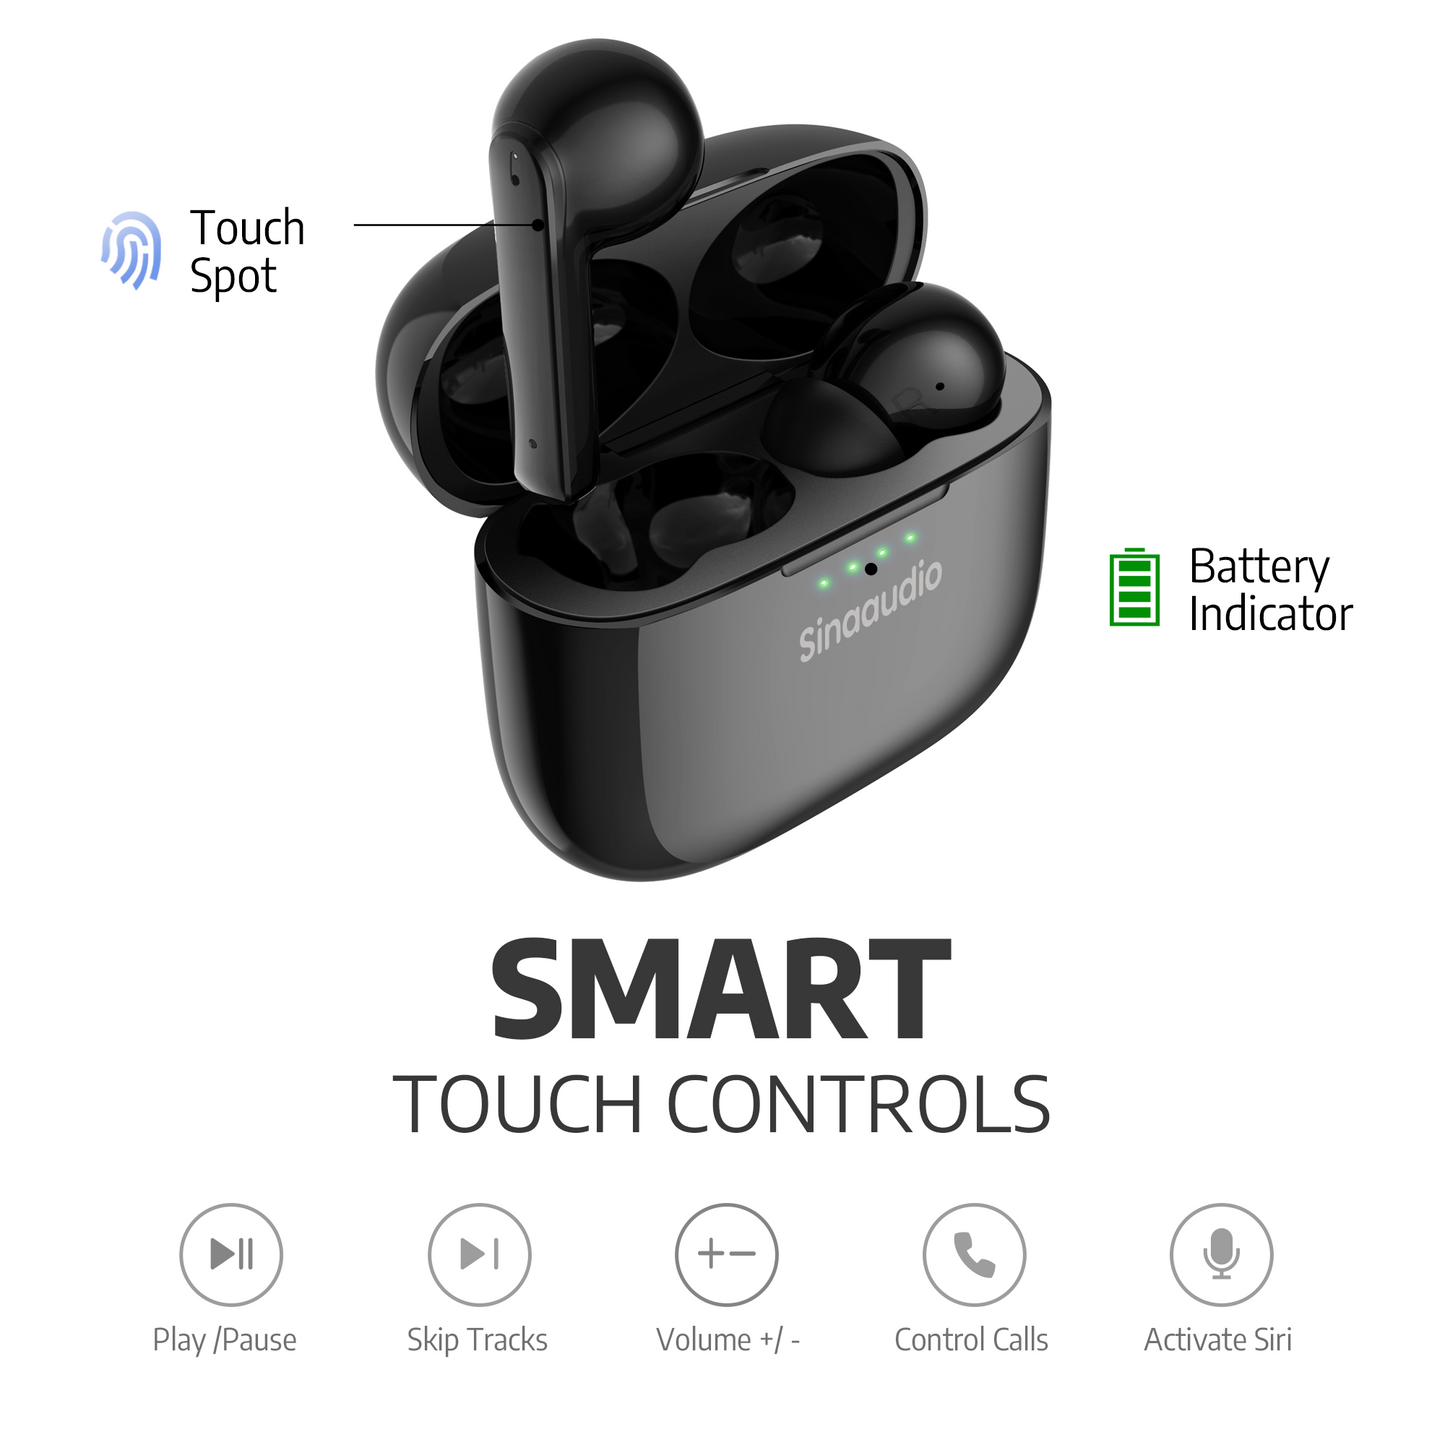 SINAAUDIO S1 - Wireless In-Ear Earbuds with Active Noise Cancellation (ANC) and Charging Case